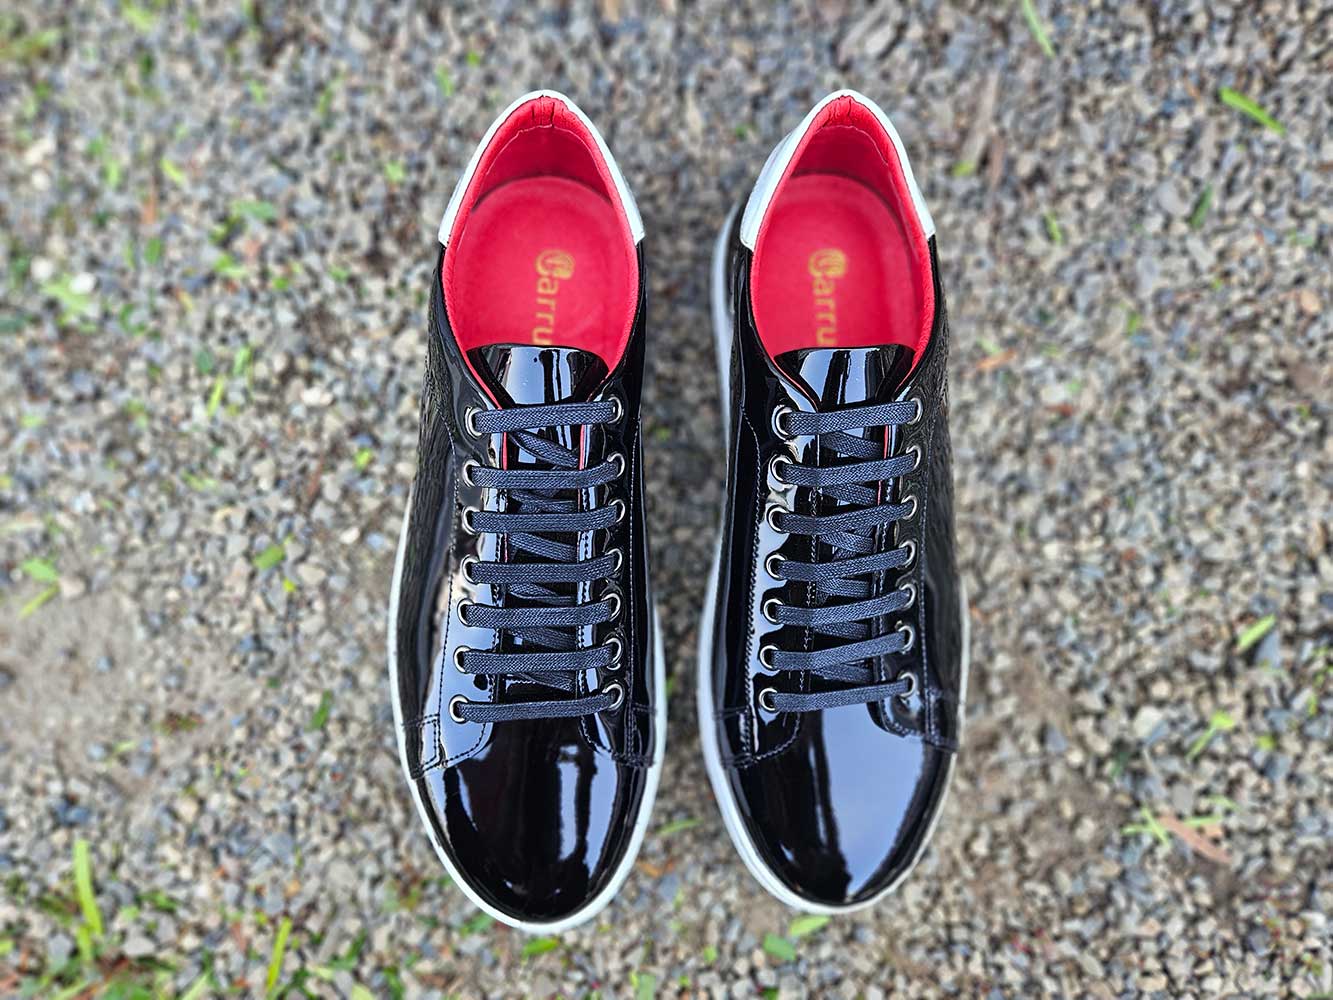 Patent Leather Dress Sneaker